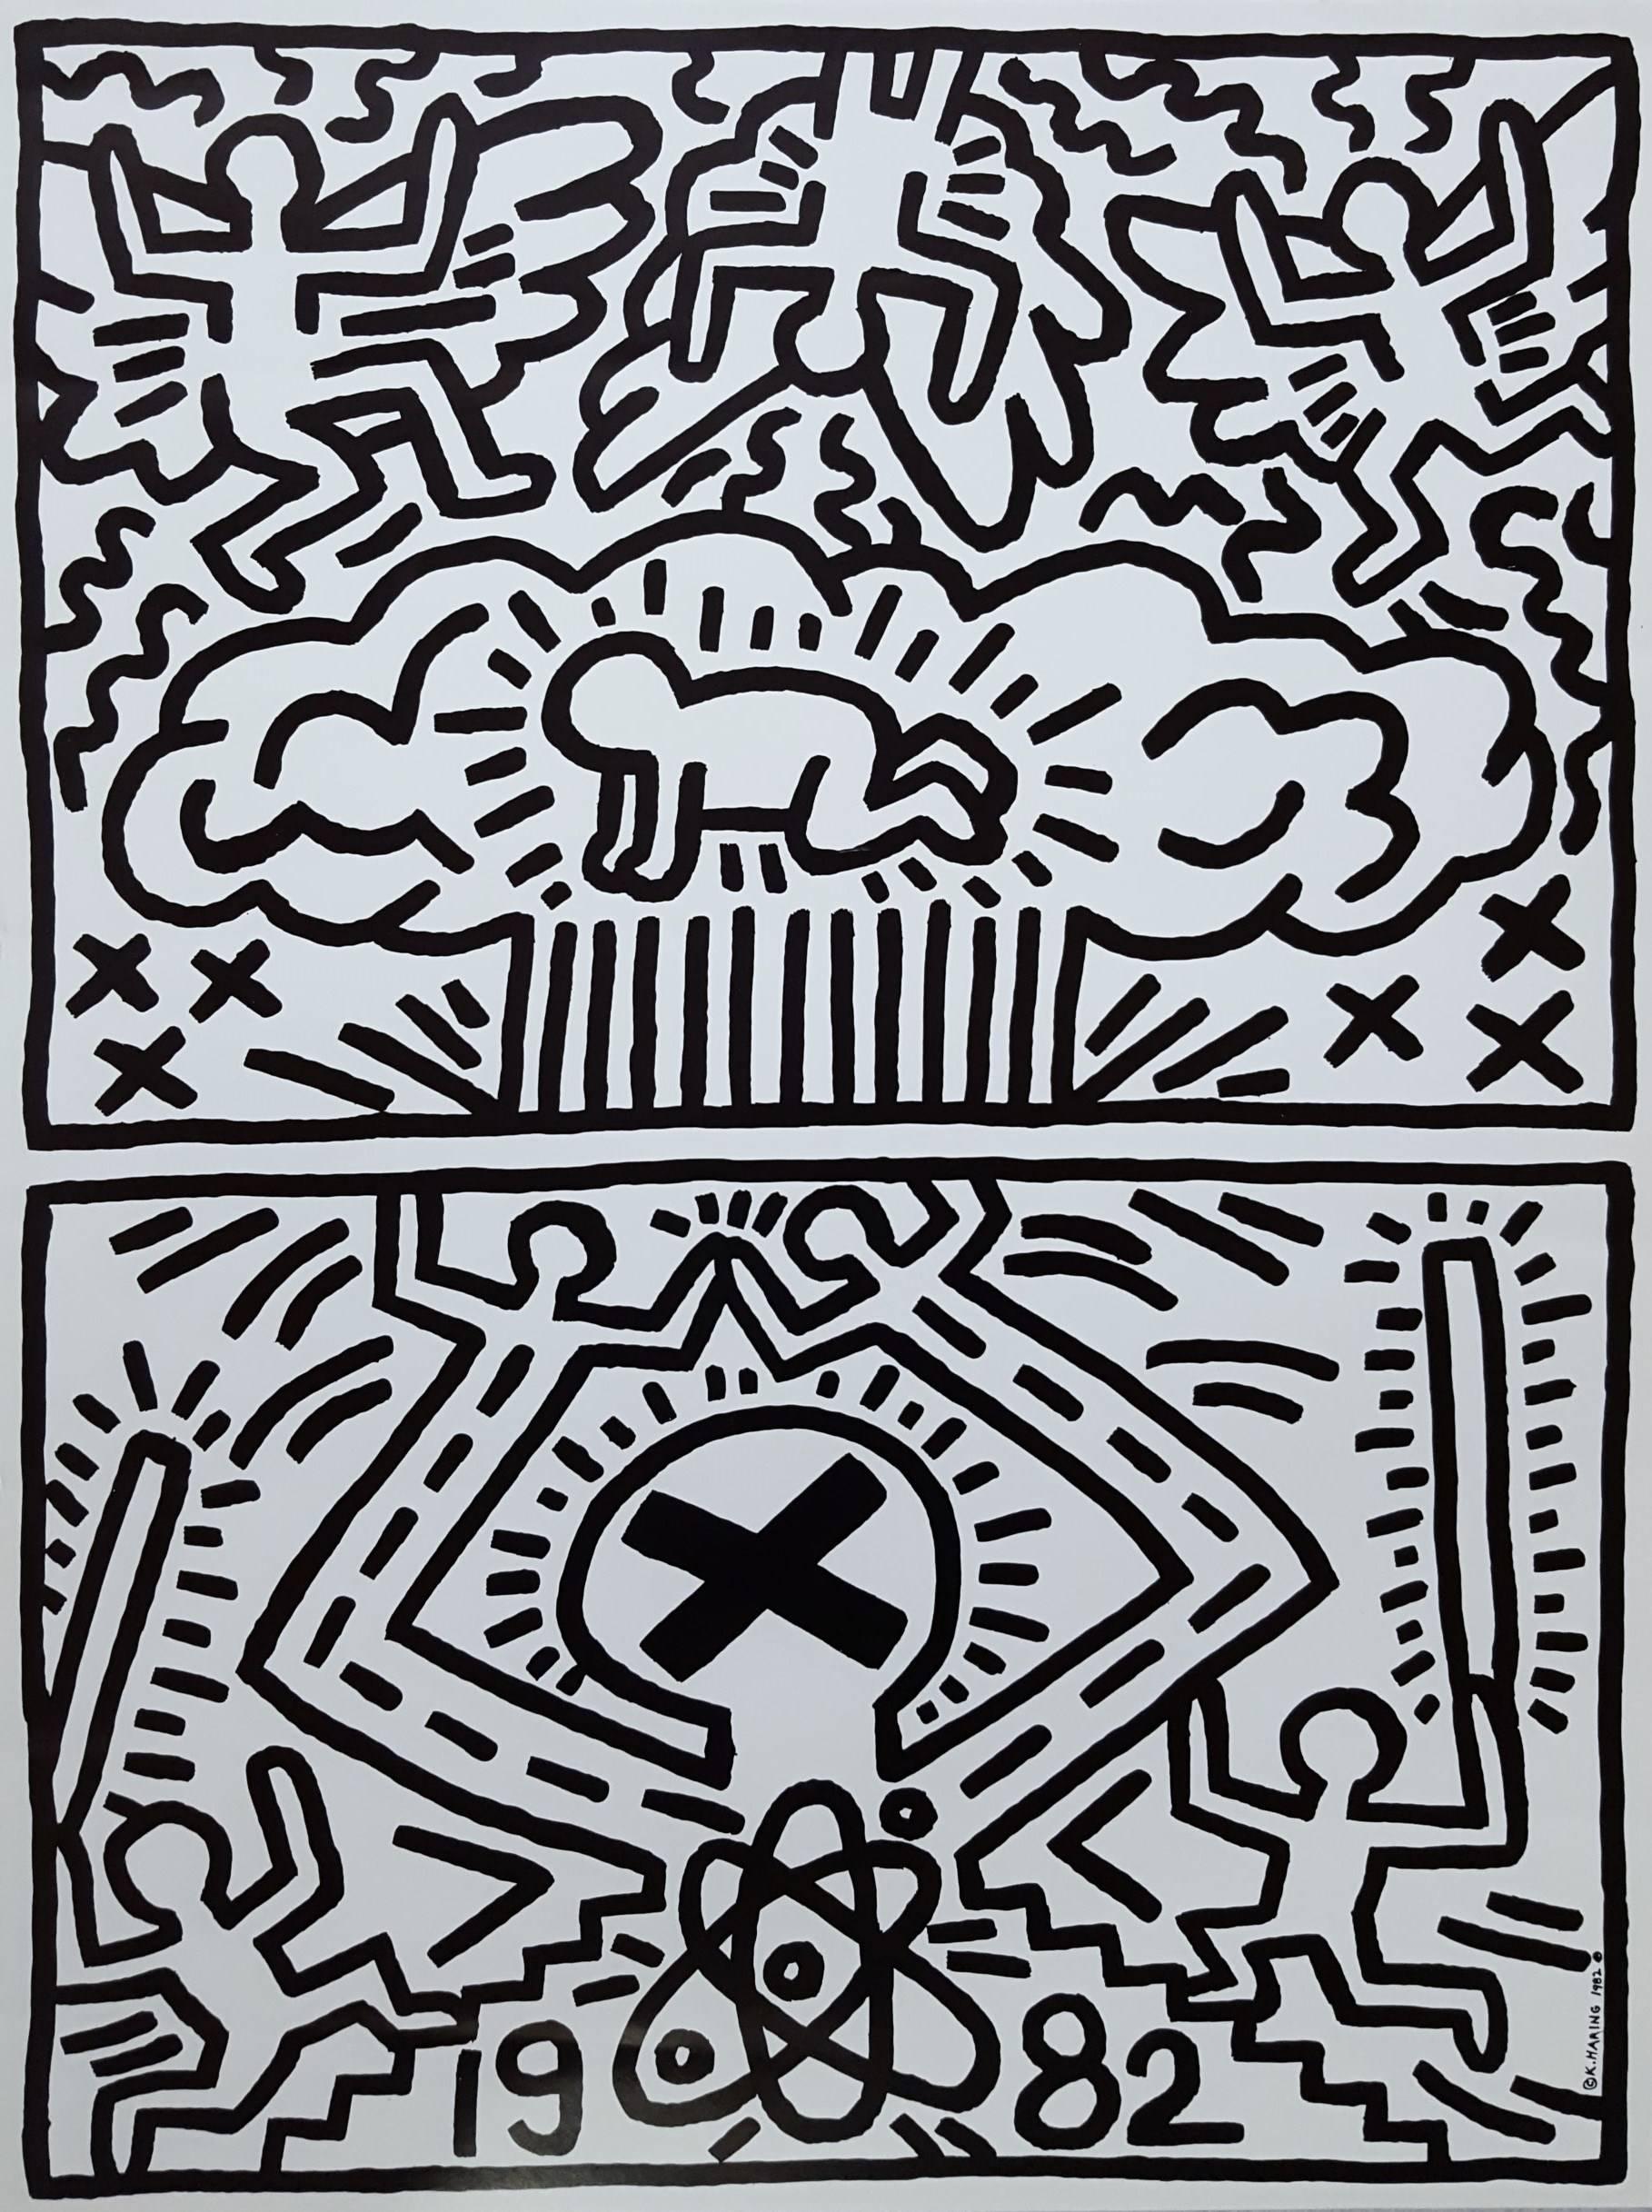 Keith Haring Figurative Print - Poster for Nuclear Disarmament